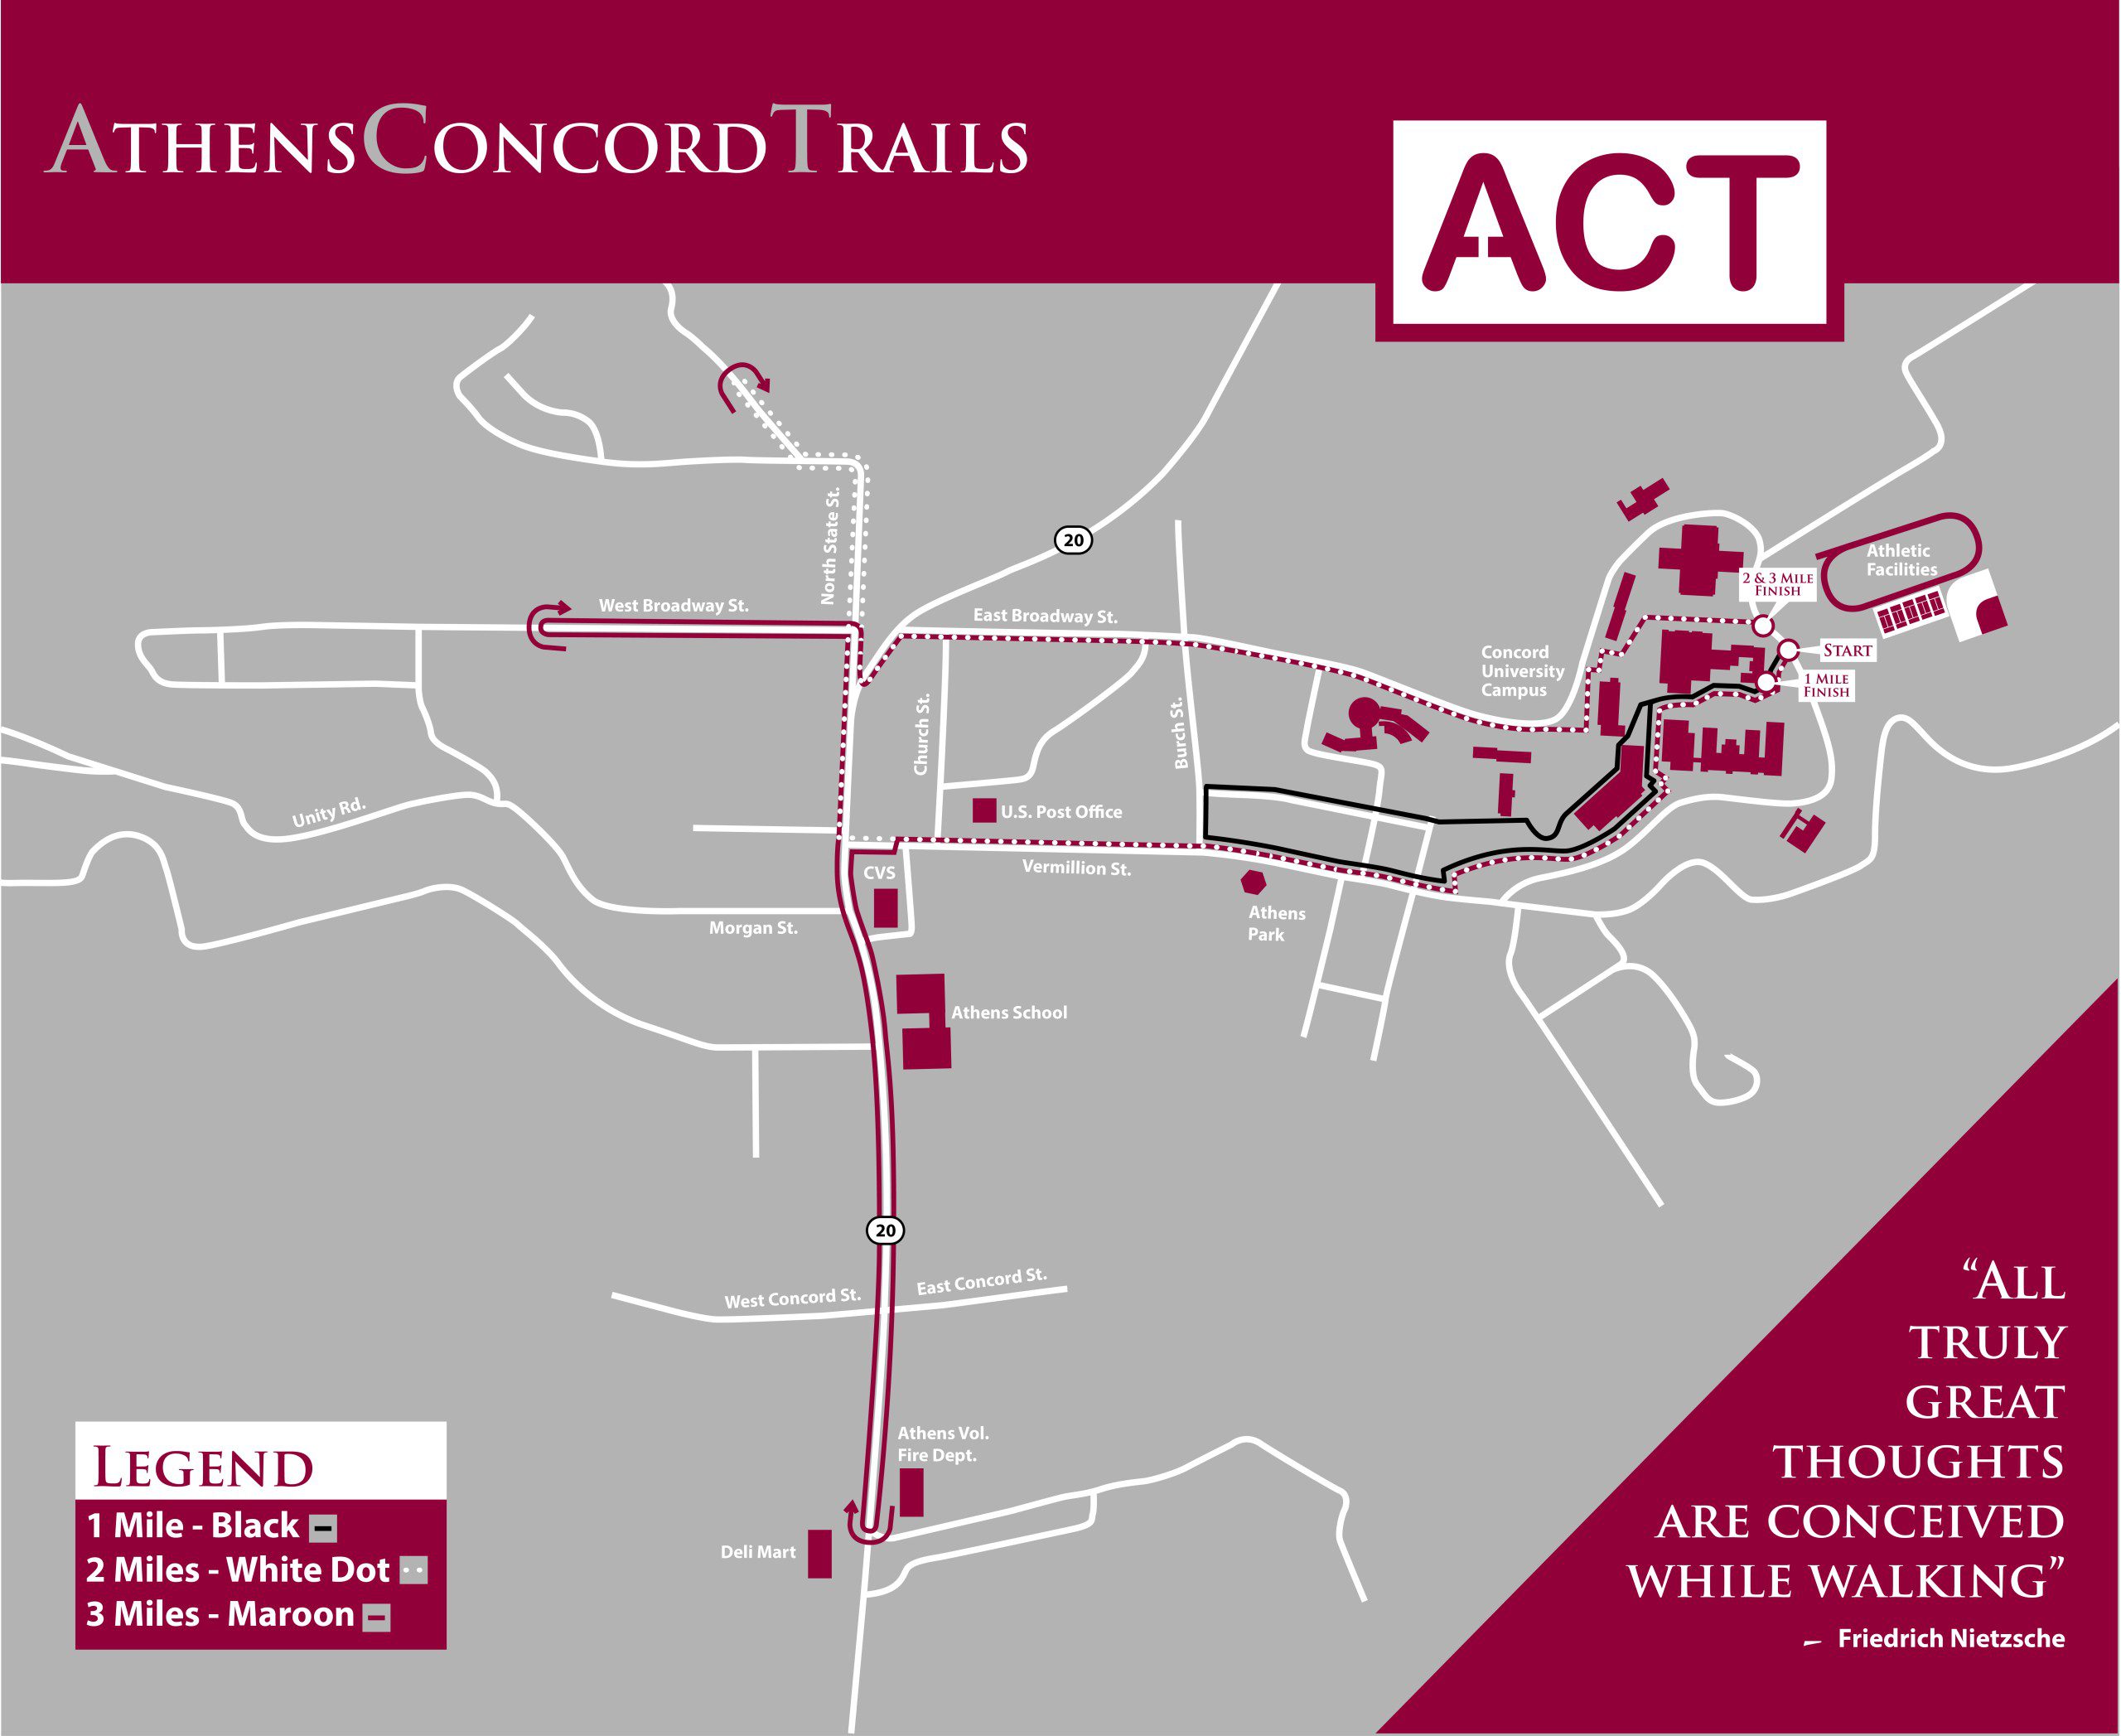 A map of the Athens Concord Trails that run through campus and the town of Athens